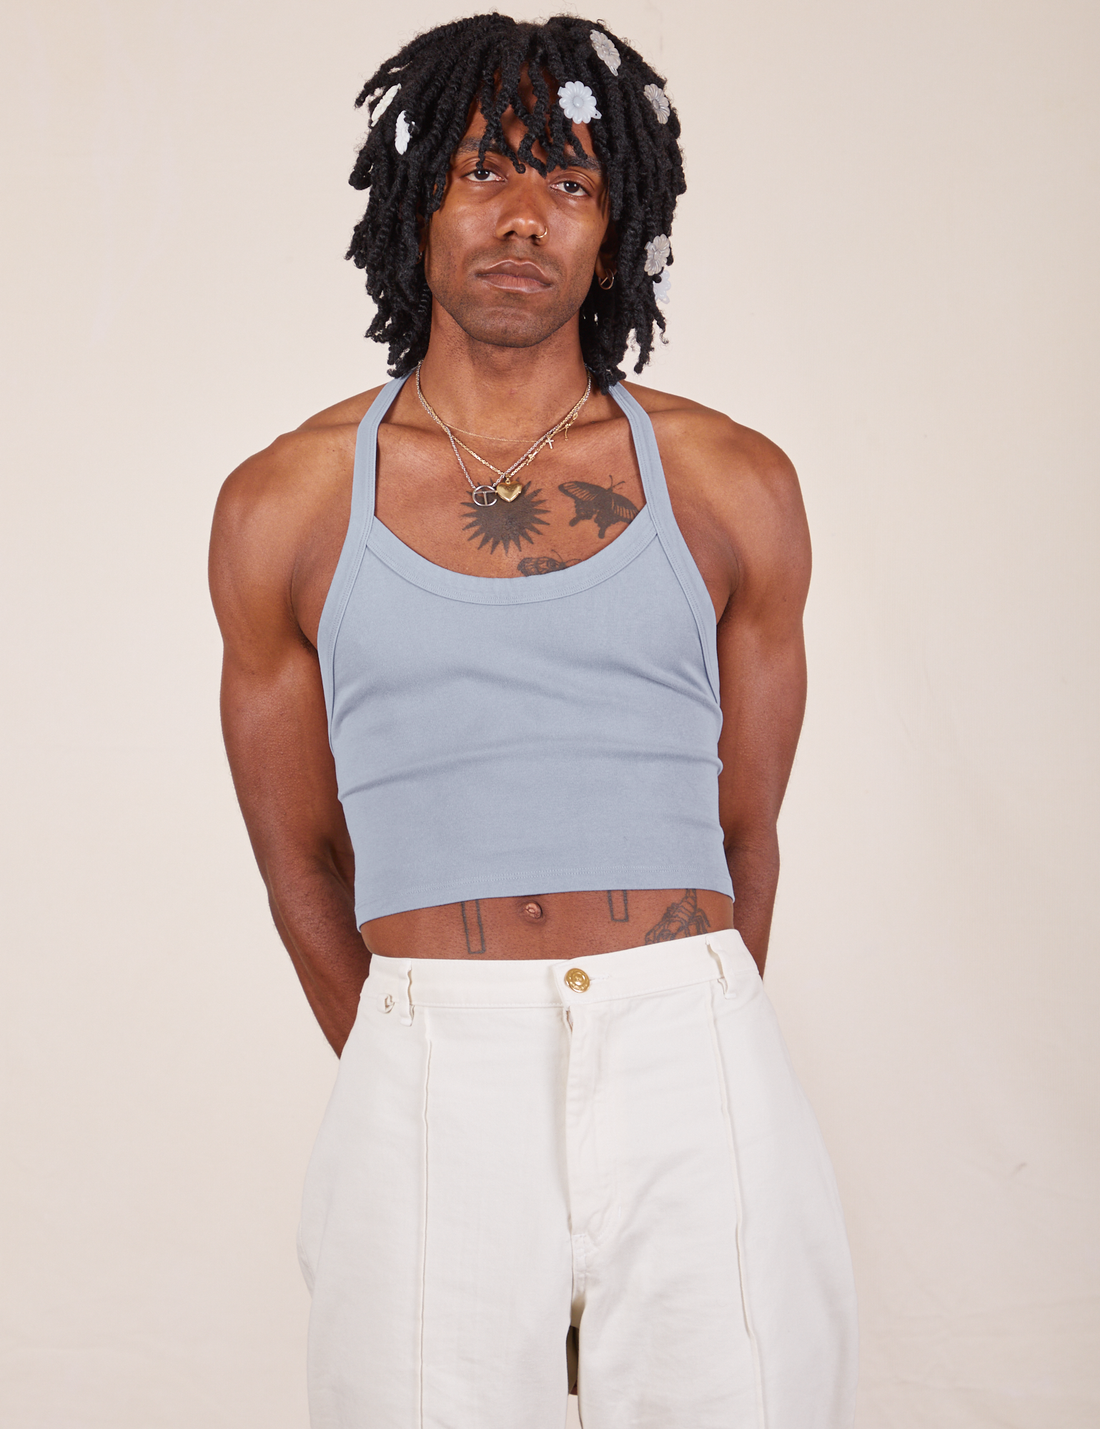 Jerrod is 6'3" and wearing XS Halter Top in Periwinkle paired with vintage off-white Western Pants